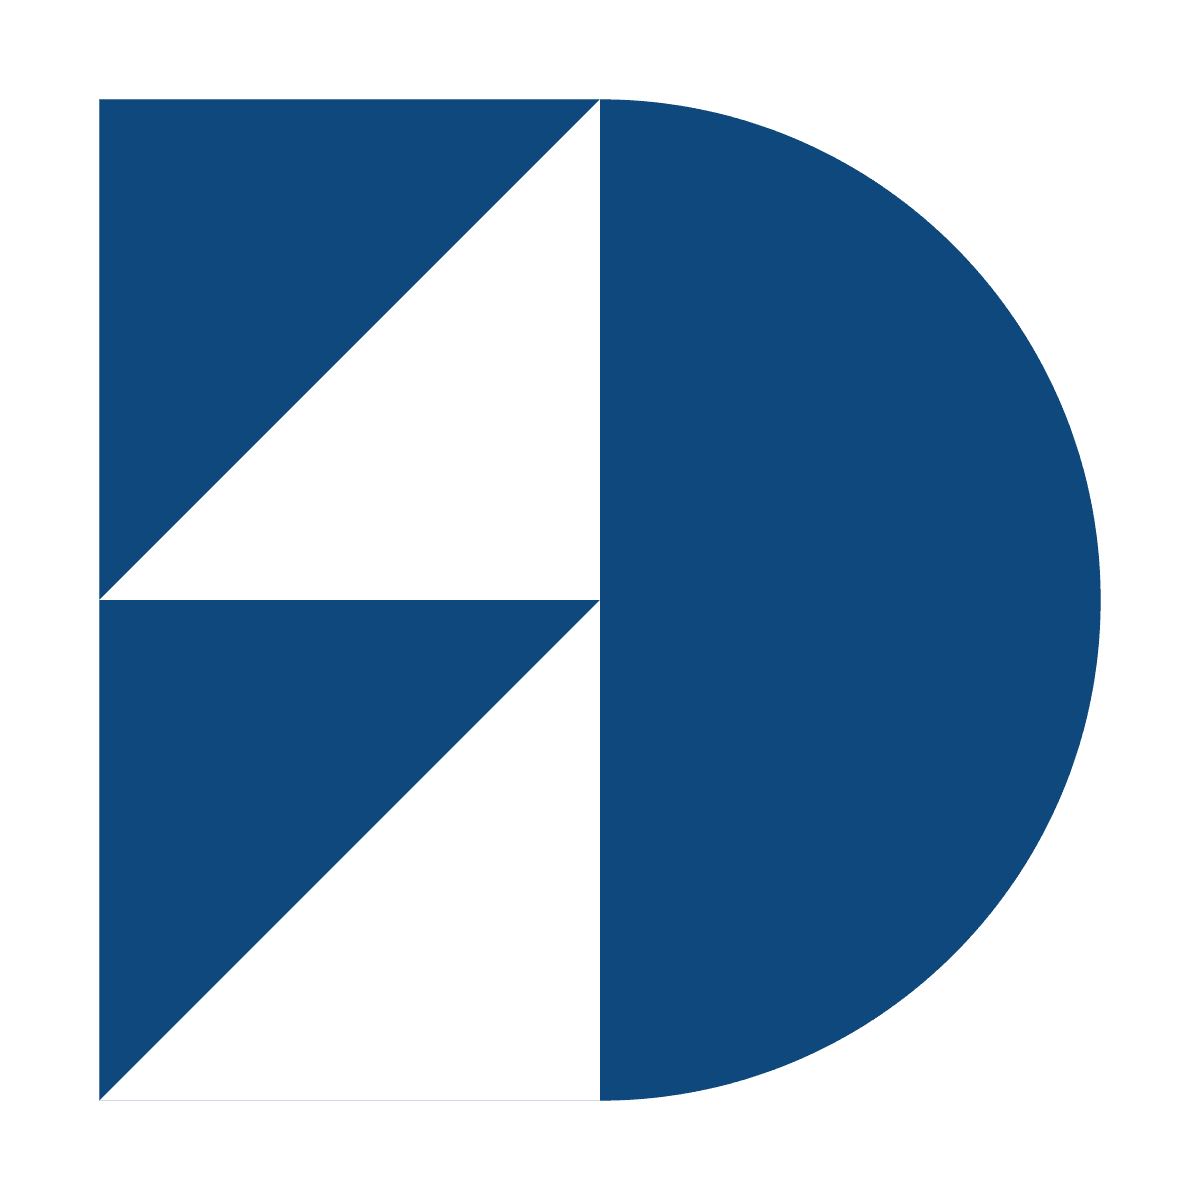 bold blue wordmark logo with stacked d letter